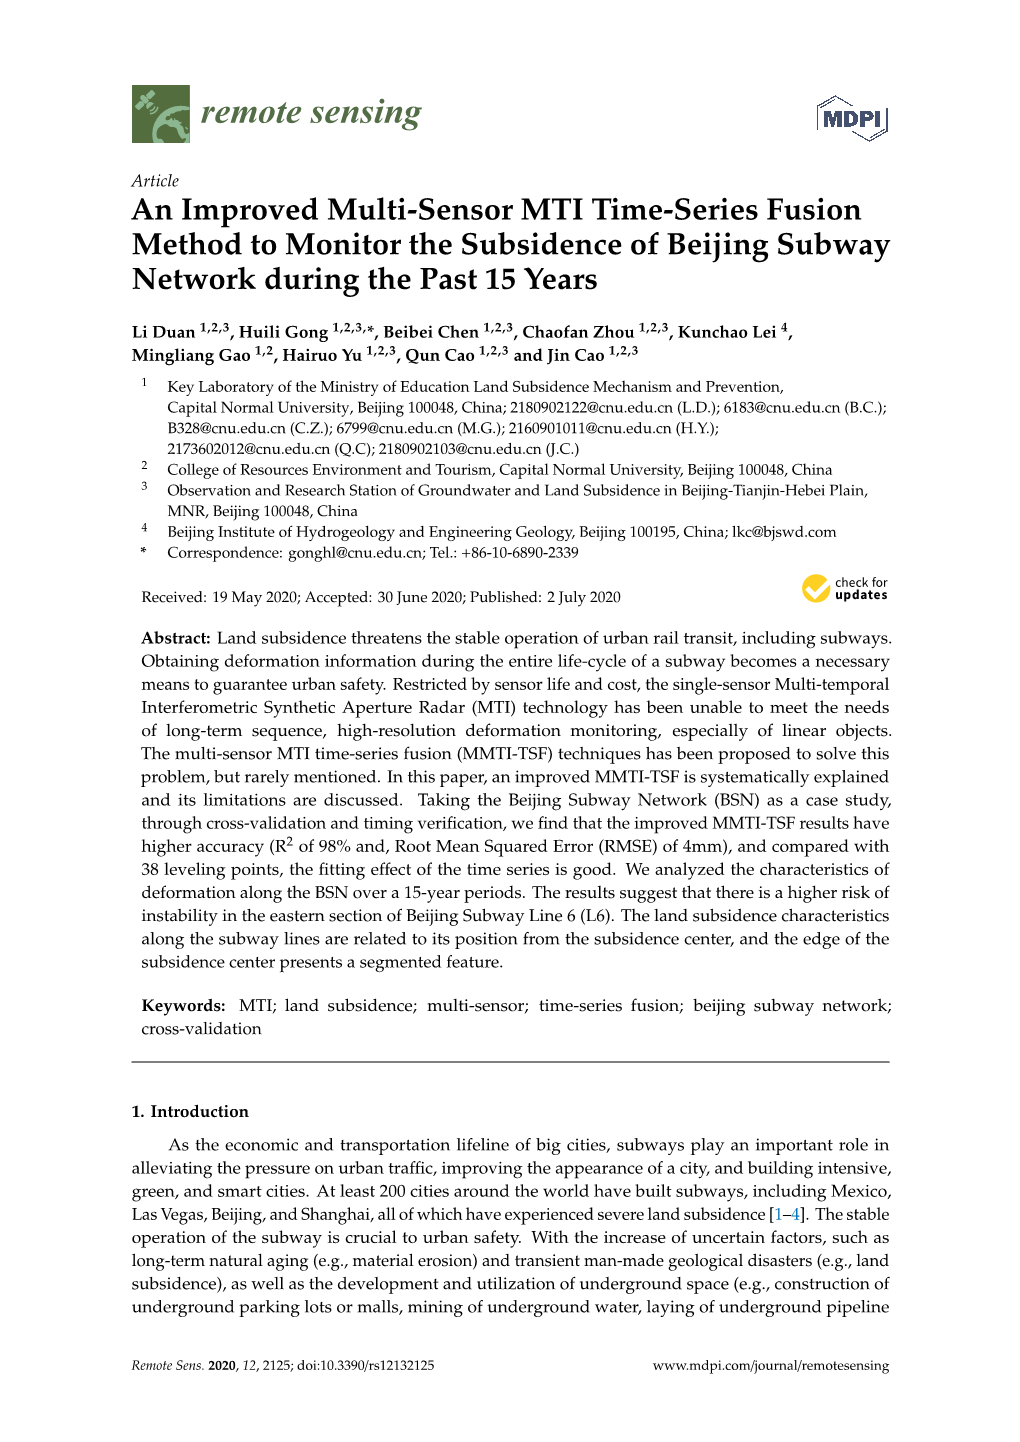 An Improved Multi-Sensor MTI Time-Series Fusion Method to Monitor the Subsidence of Beijing Subway Network During the Past 15 Years